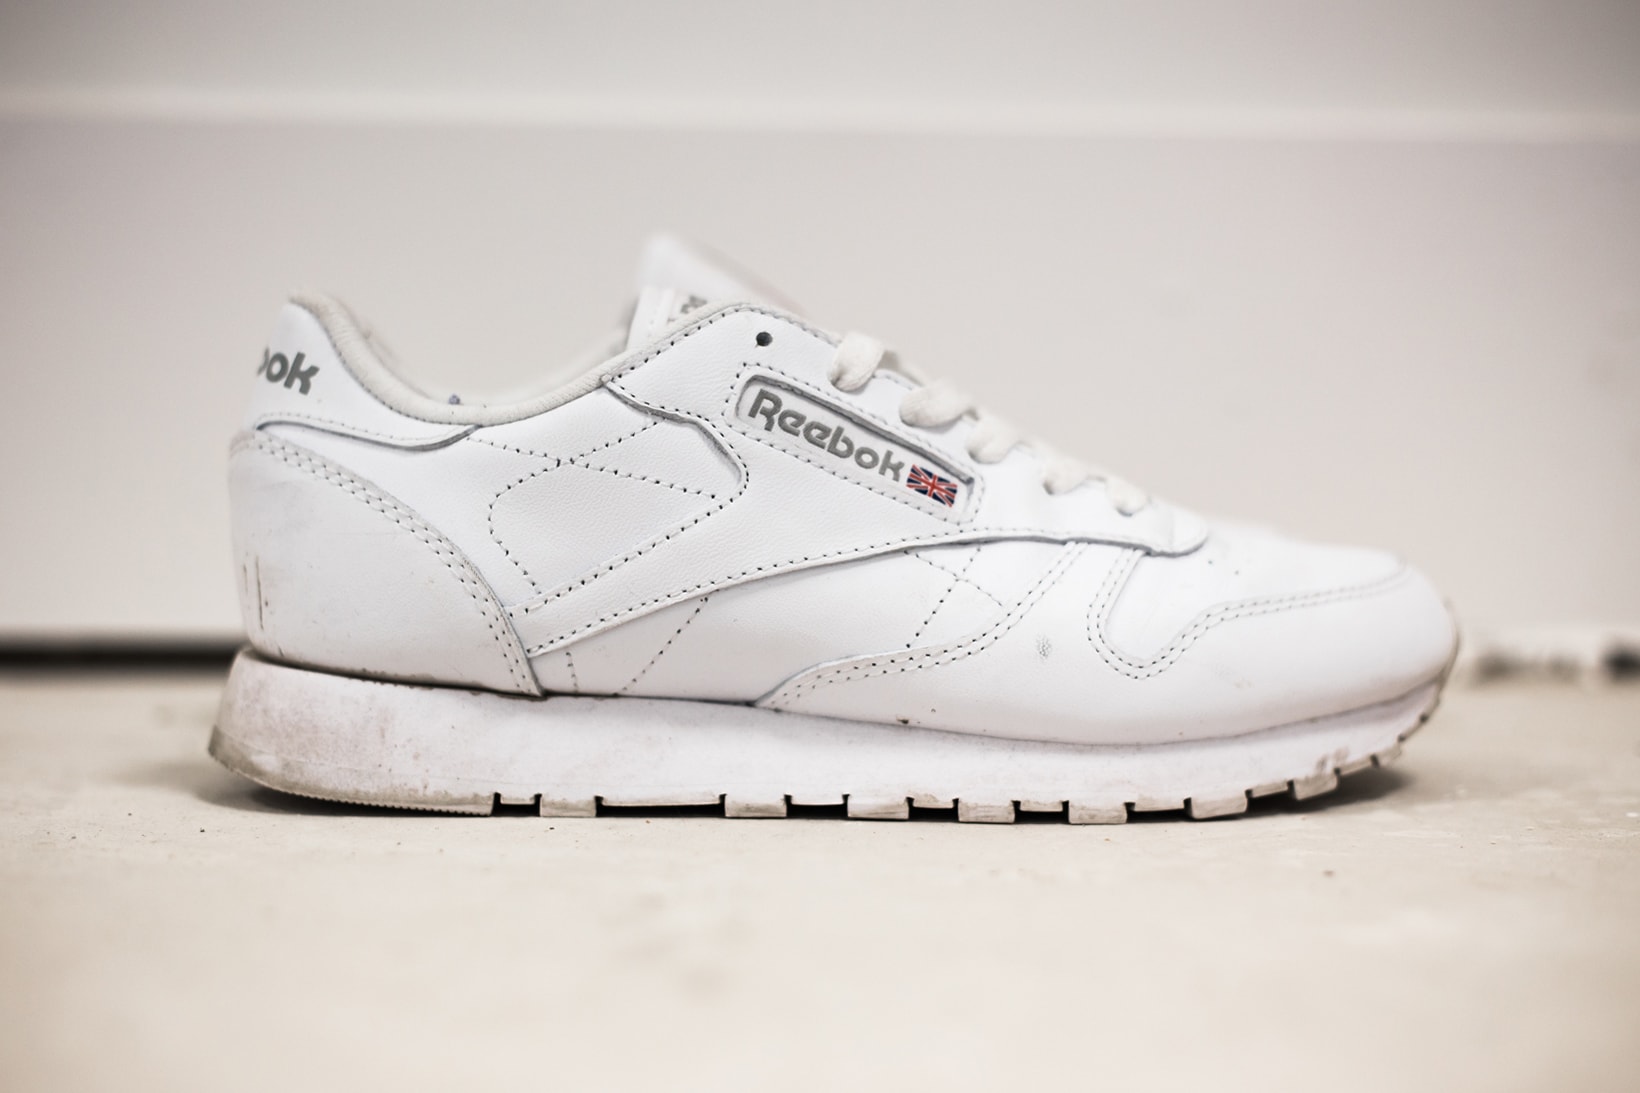 Reebok Classic Leather White Review Sneaker Hypebae 